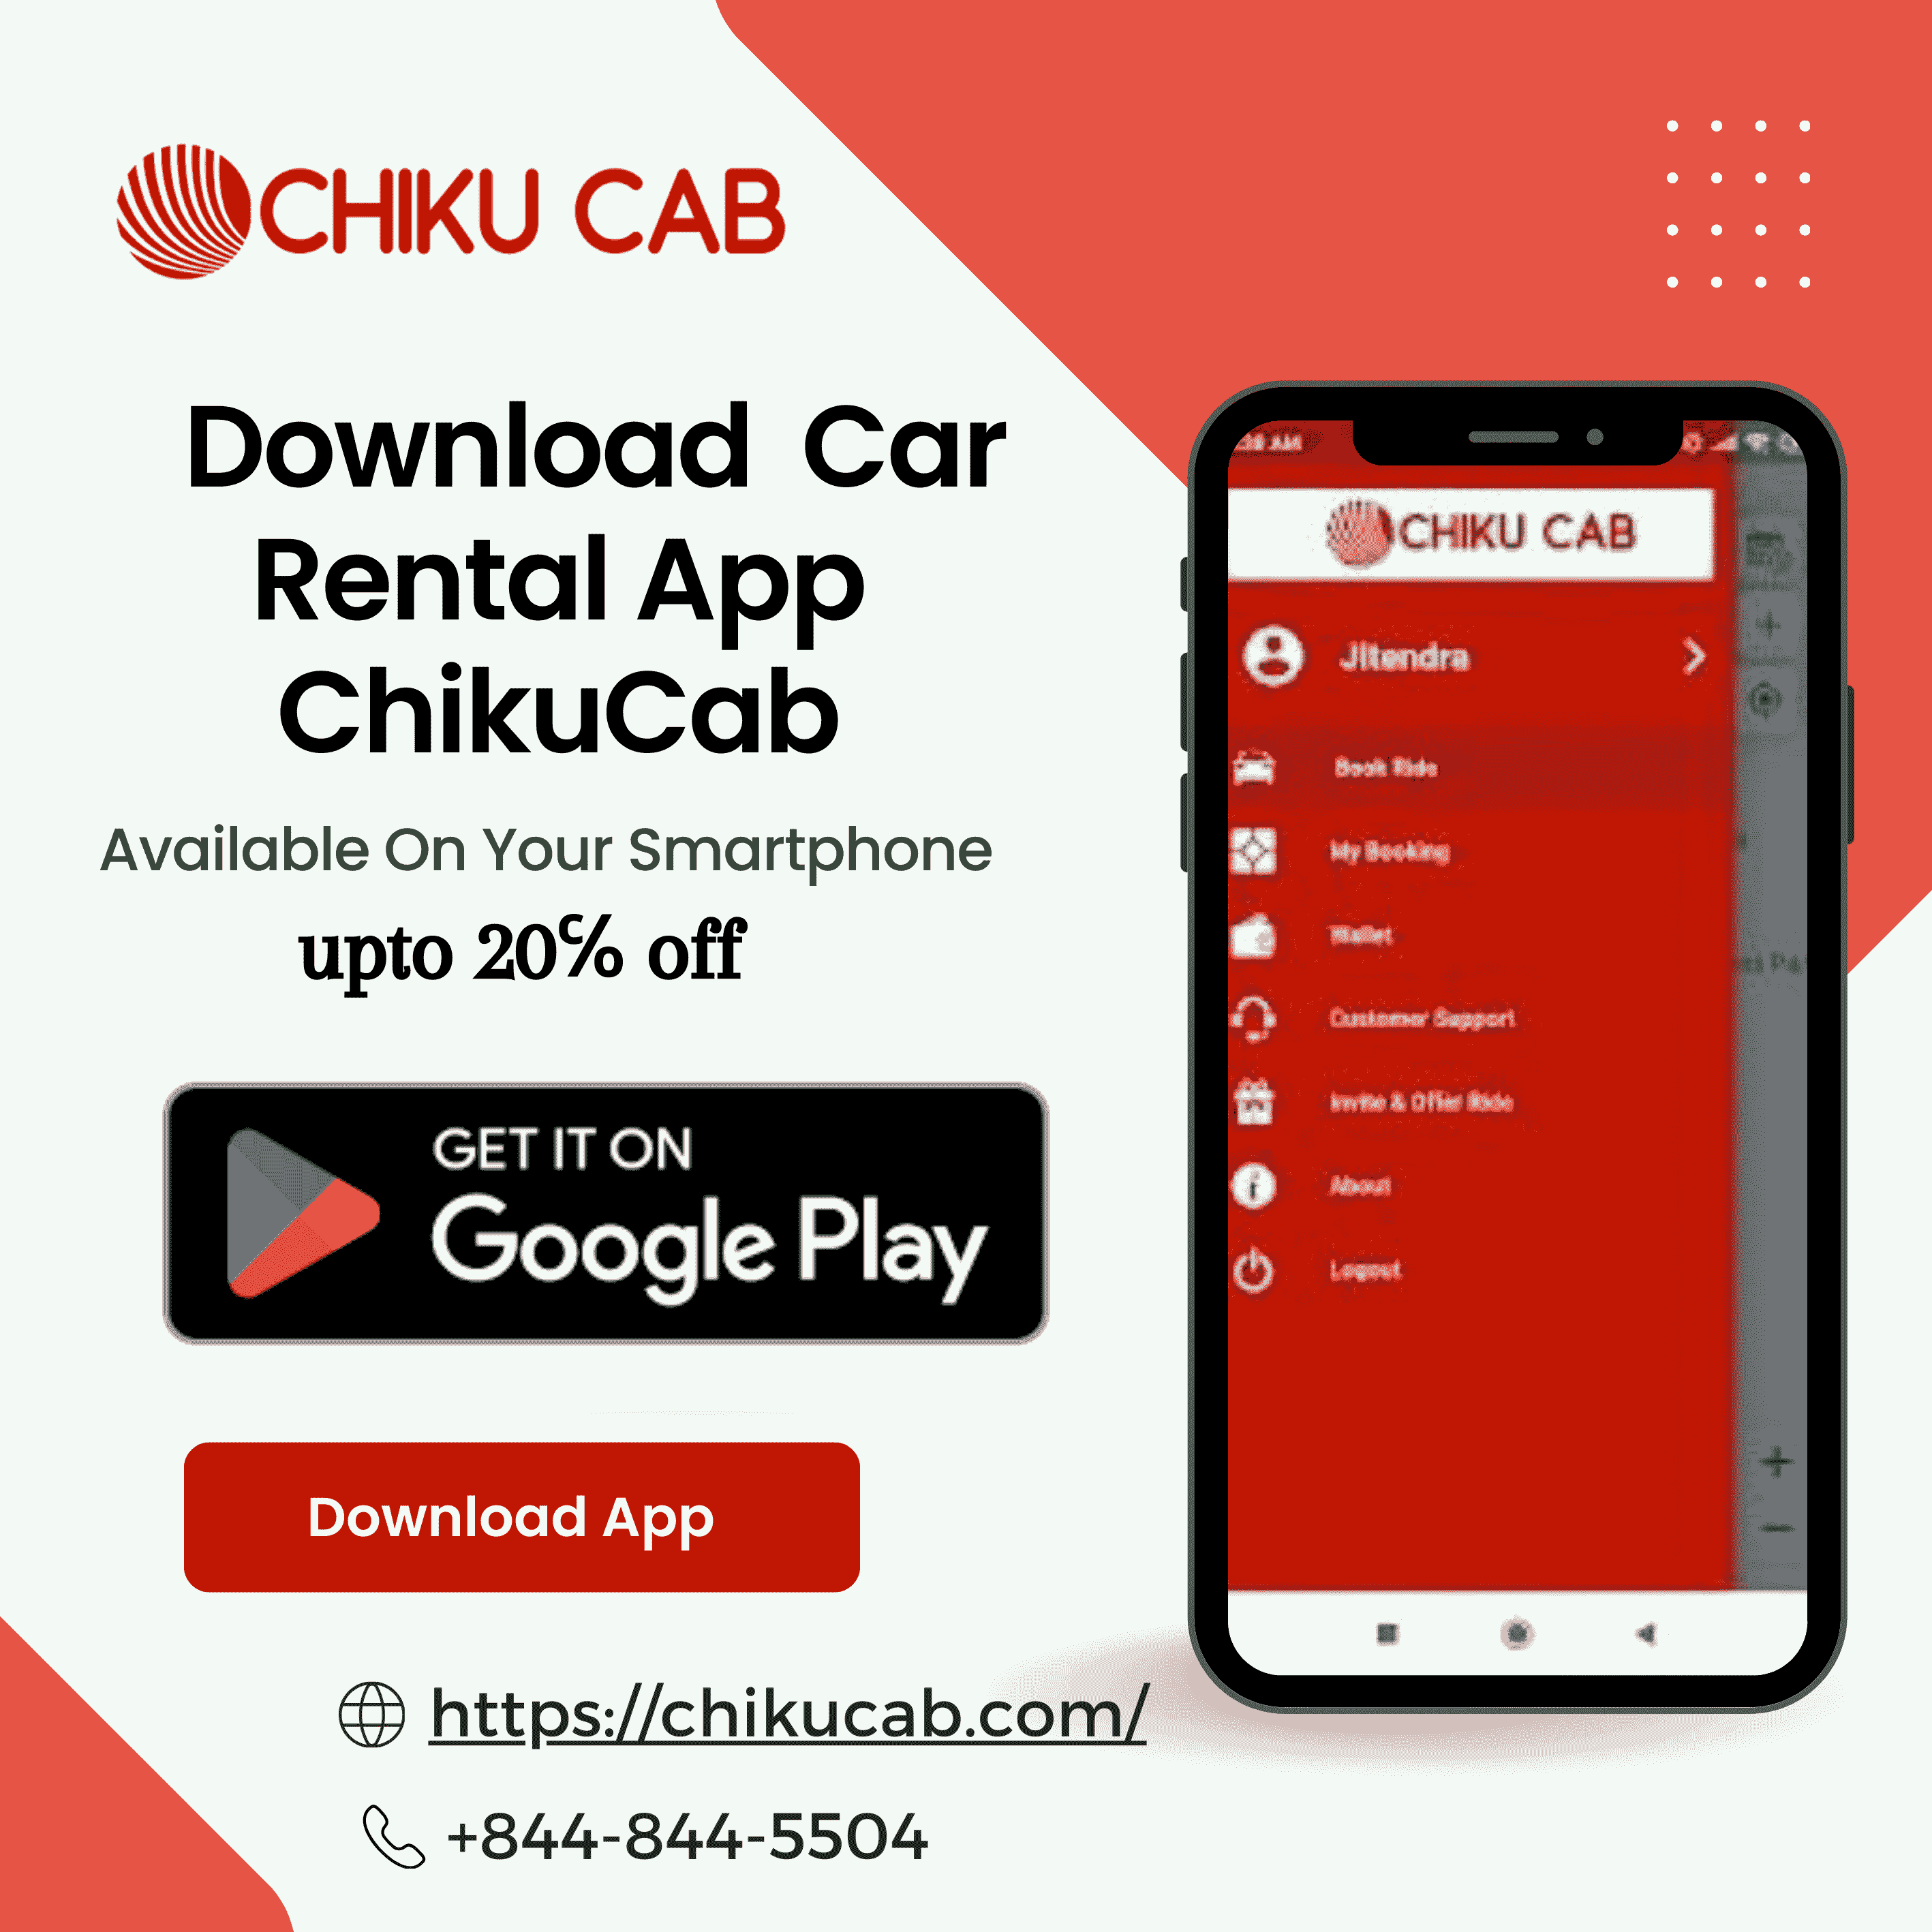 Simplify Your Travel with ChikuCab's Car Rental App - Delhi Other